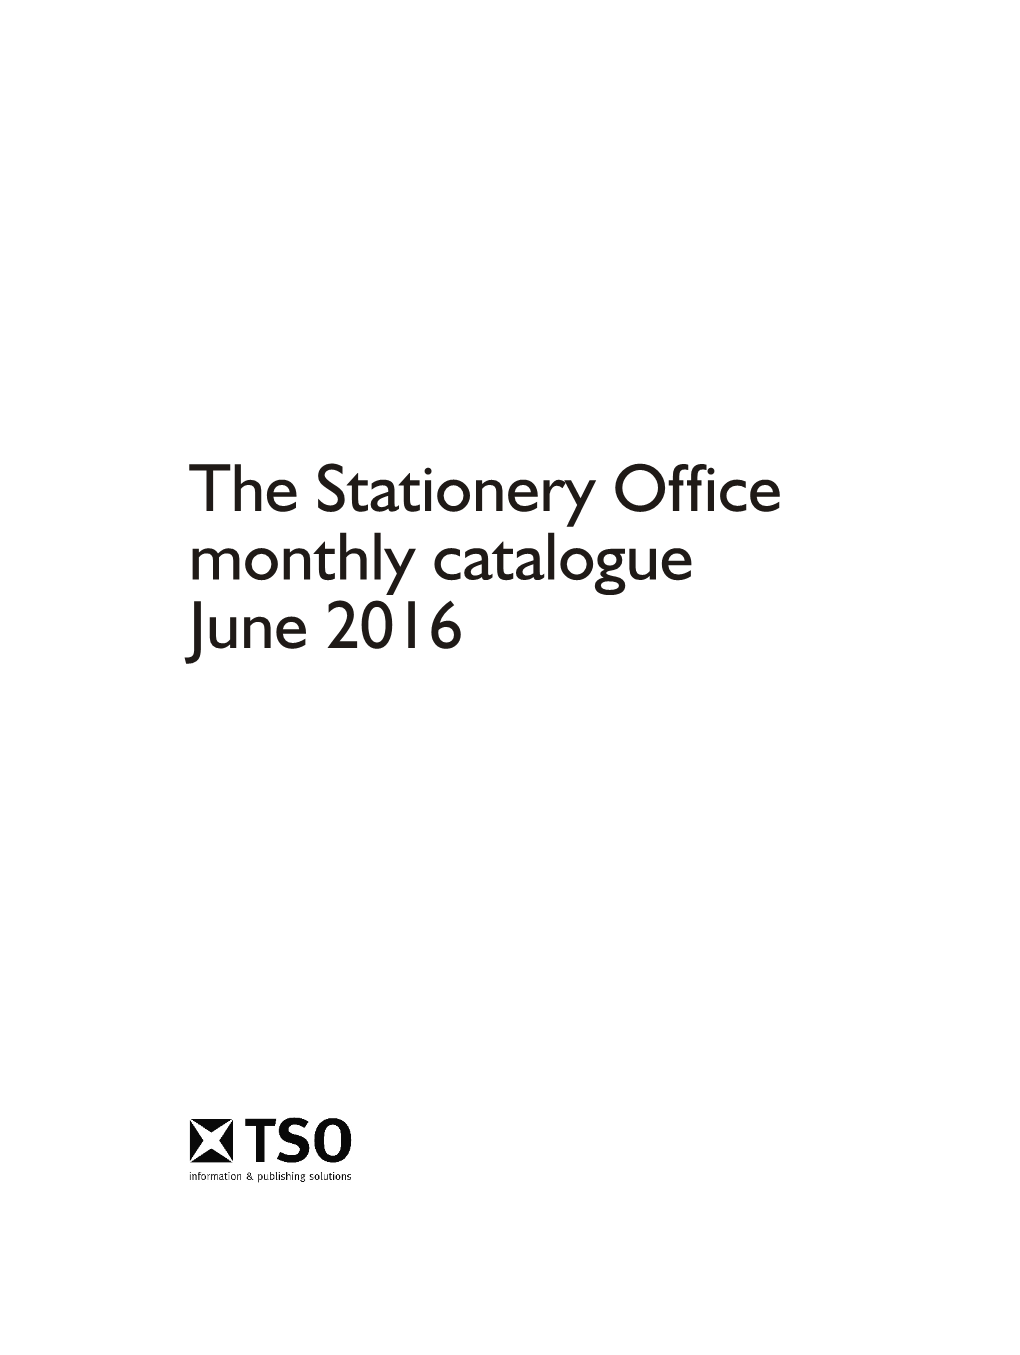 The Stationery Office Monthly Catalogue June 2016 Ii